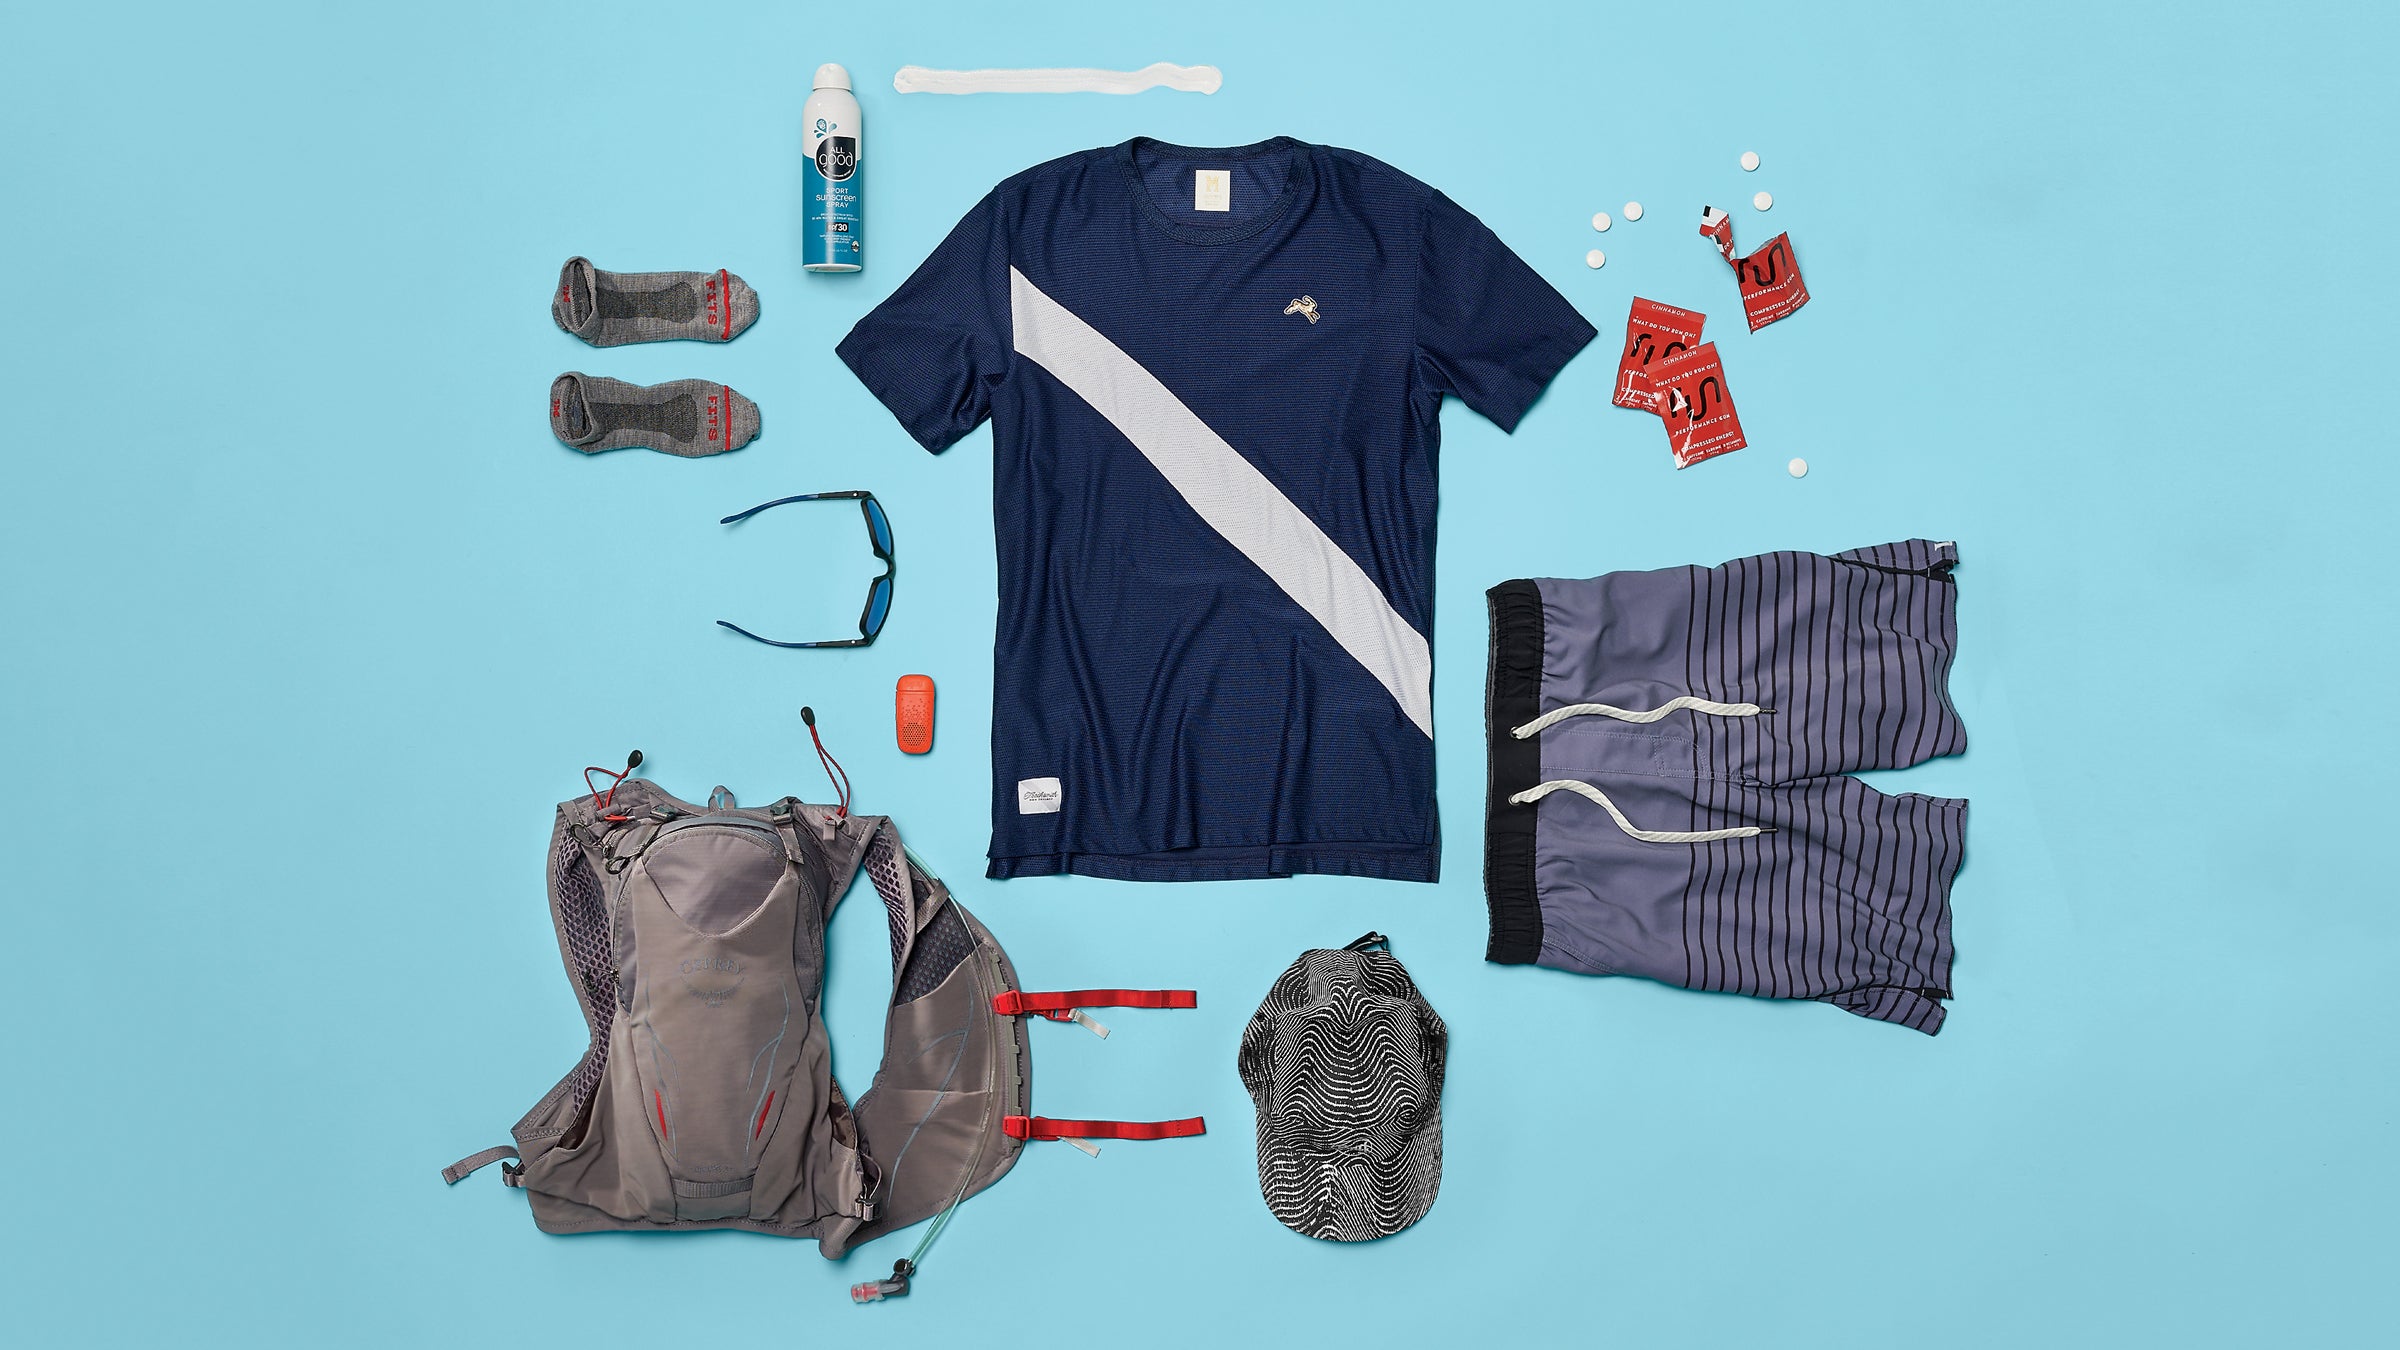 All You Need: 4 Essential Running Accessories